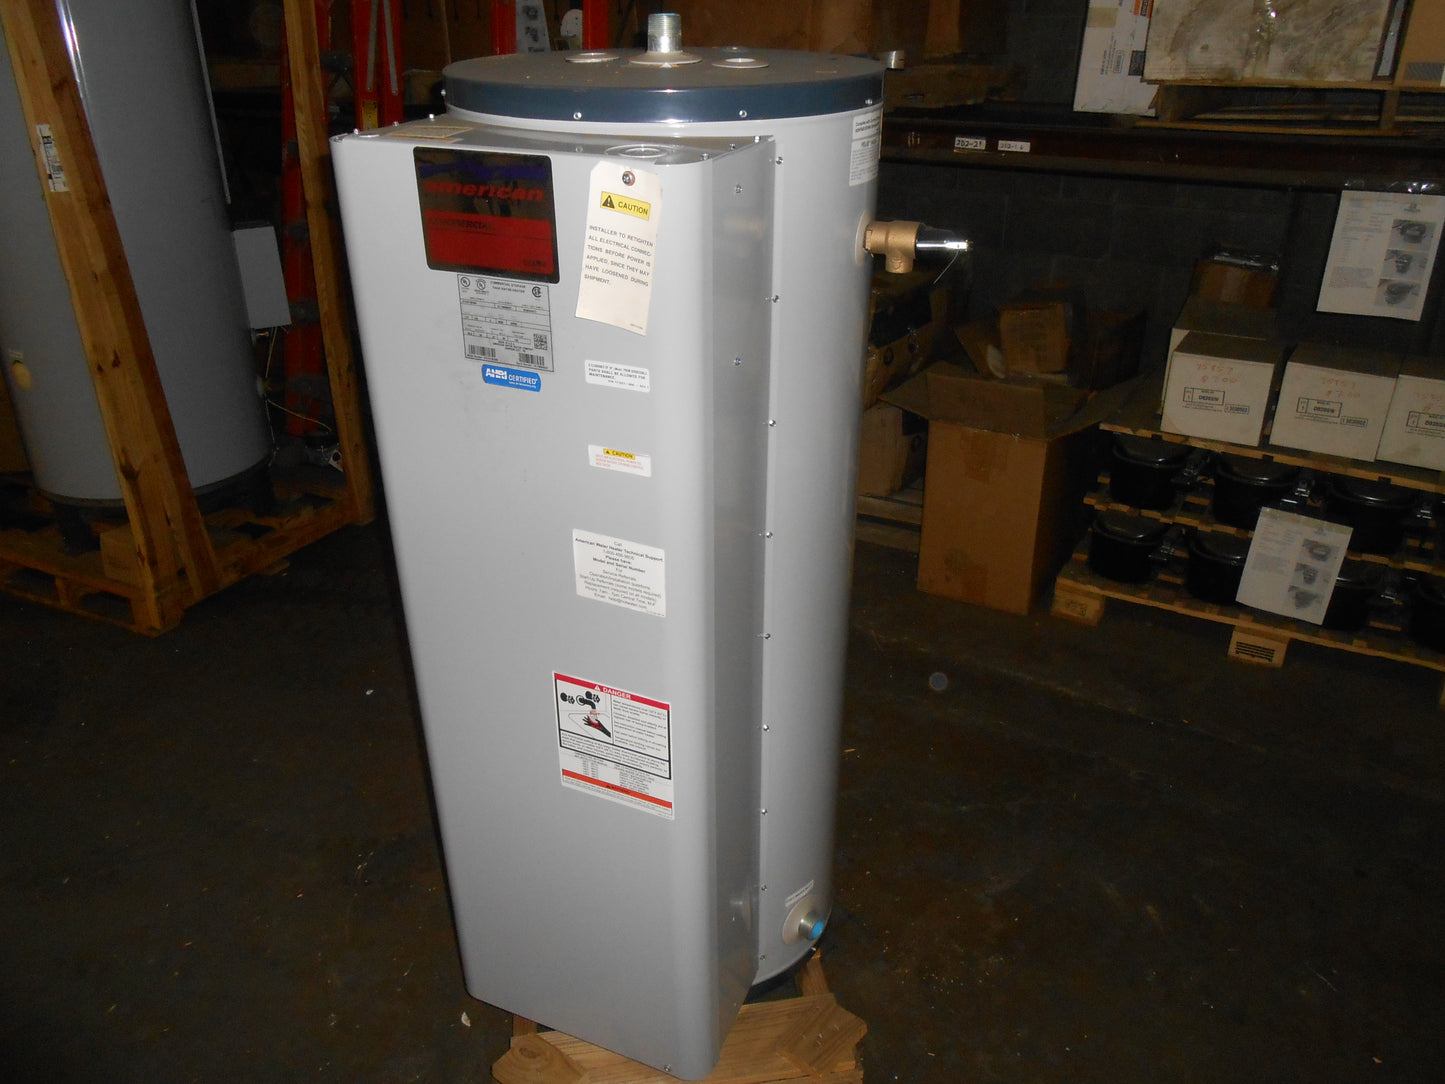 50 GALLON COMMERCIAL STORAGE TANK WATER HEATER 240 VOLT, 1/3PH, 30000W